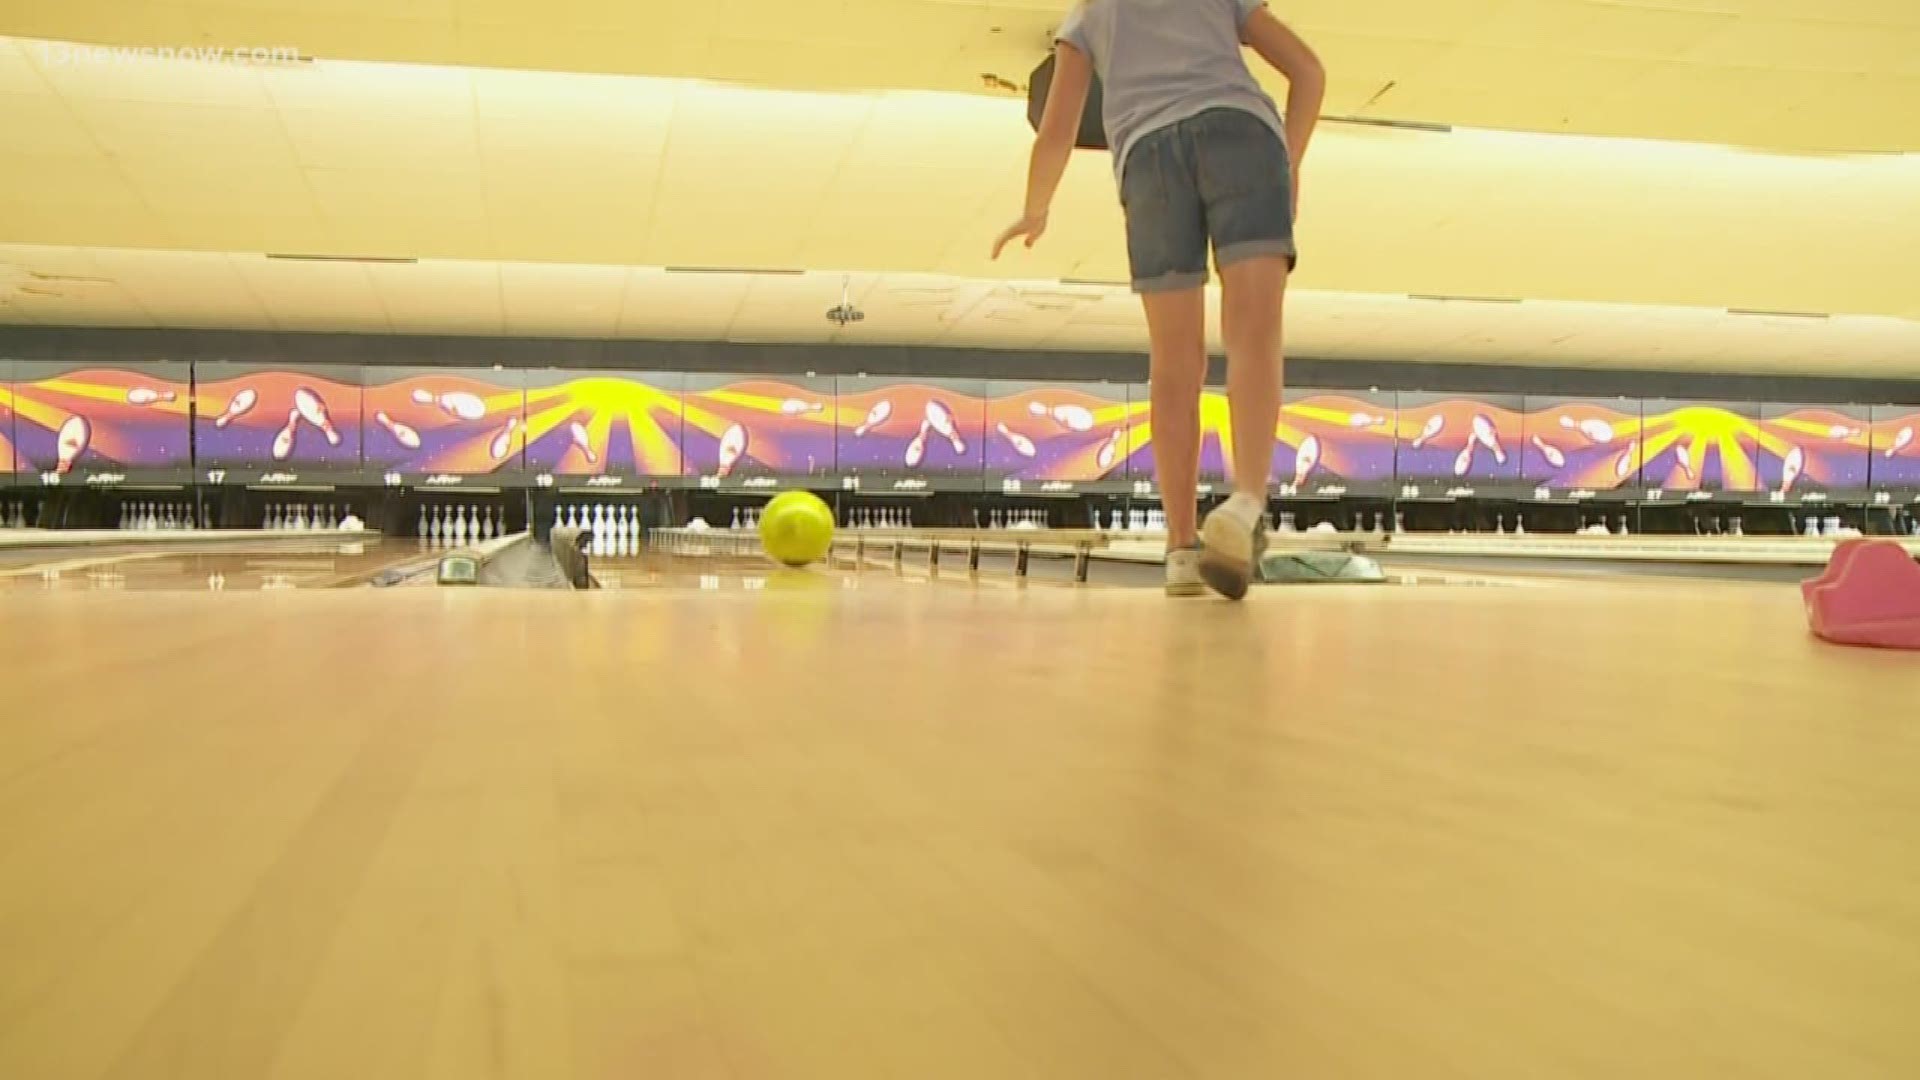 As sweltering temperatures continue, people are enjoying activities like bowling and movies to beat the heat.